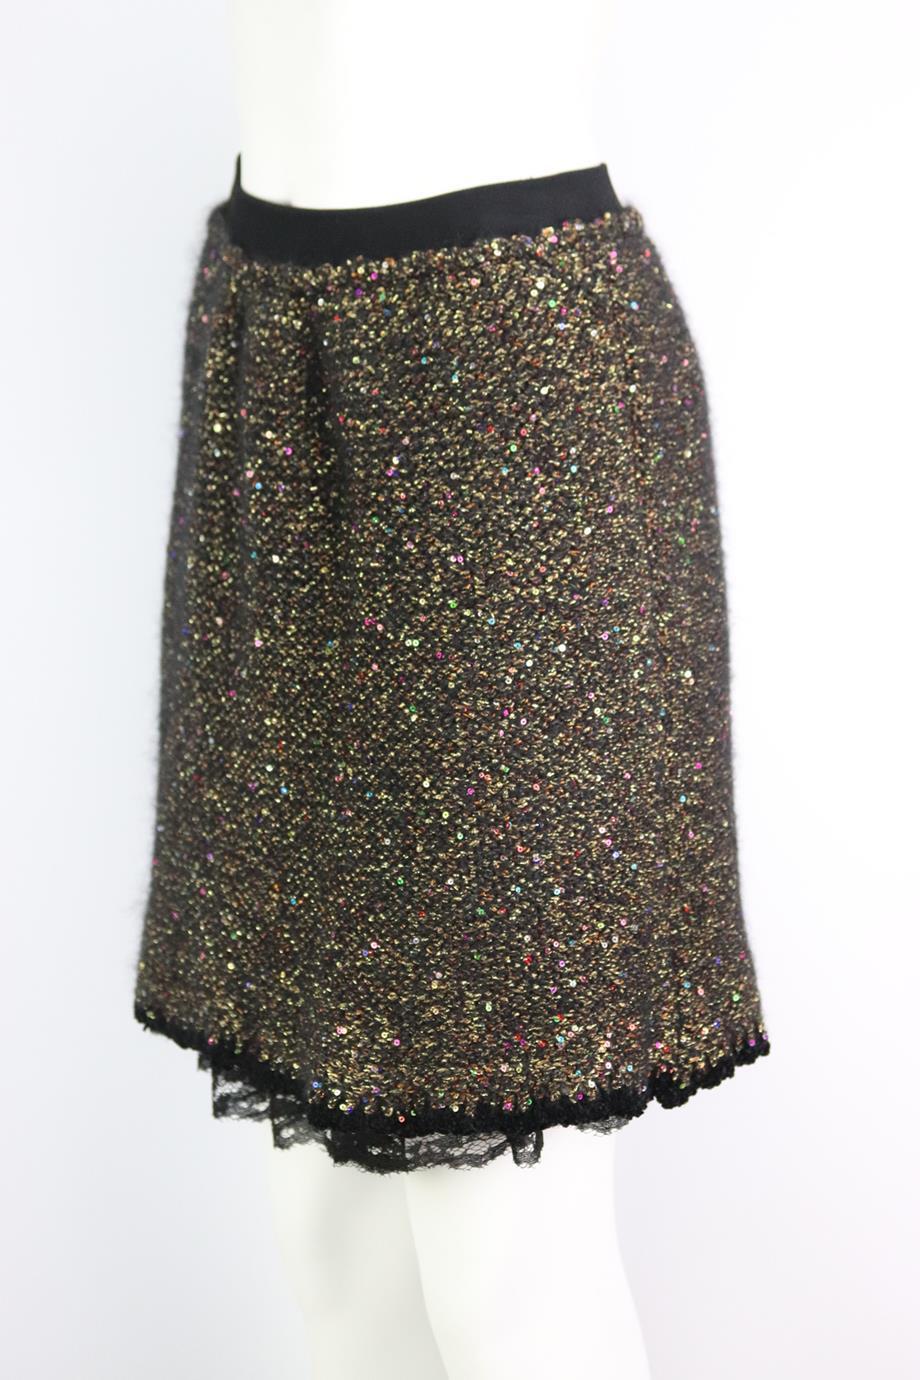 Oscar de La Renta metallic knitted skirt. Made from gold and black sequin embellished knitted fabric with lace lining. Gold and black. Pull on. 42% Viscose, 21% polyester, 14% mohair, 12% polyamide, 2% metallized polyester. Size: Medium (UK 10, US